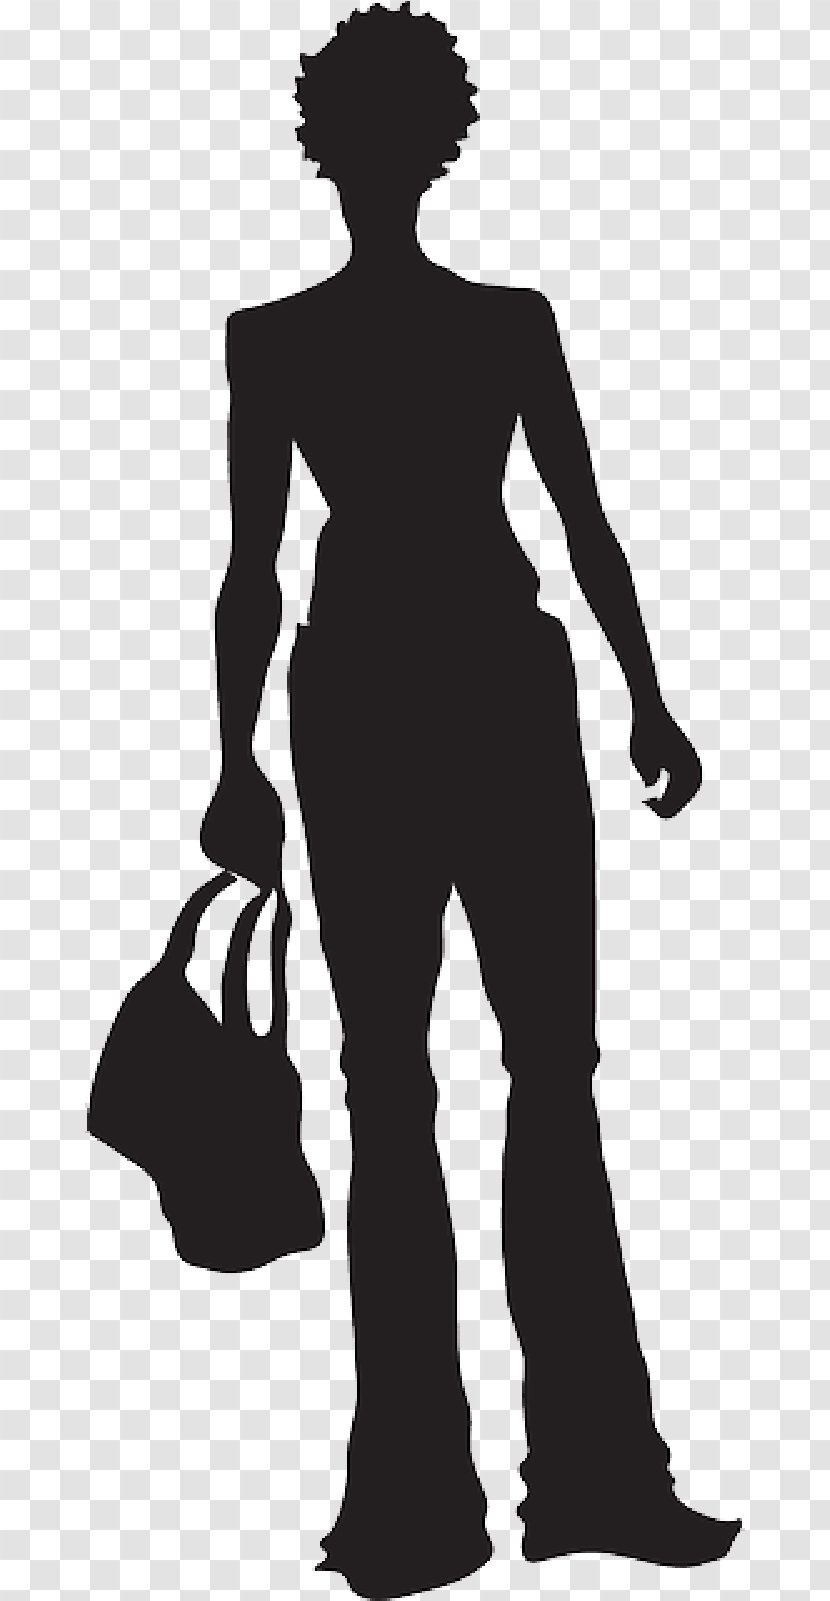 Money Bag - Silhouette - Sleeve Standing Transparent PNG